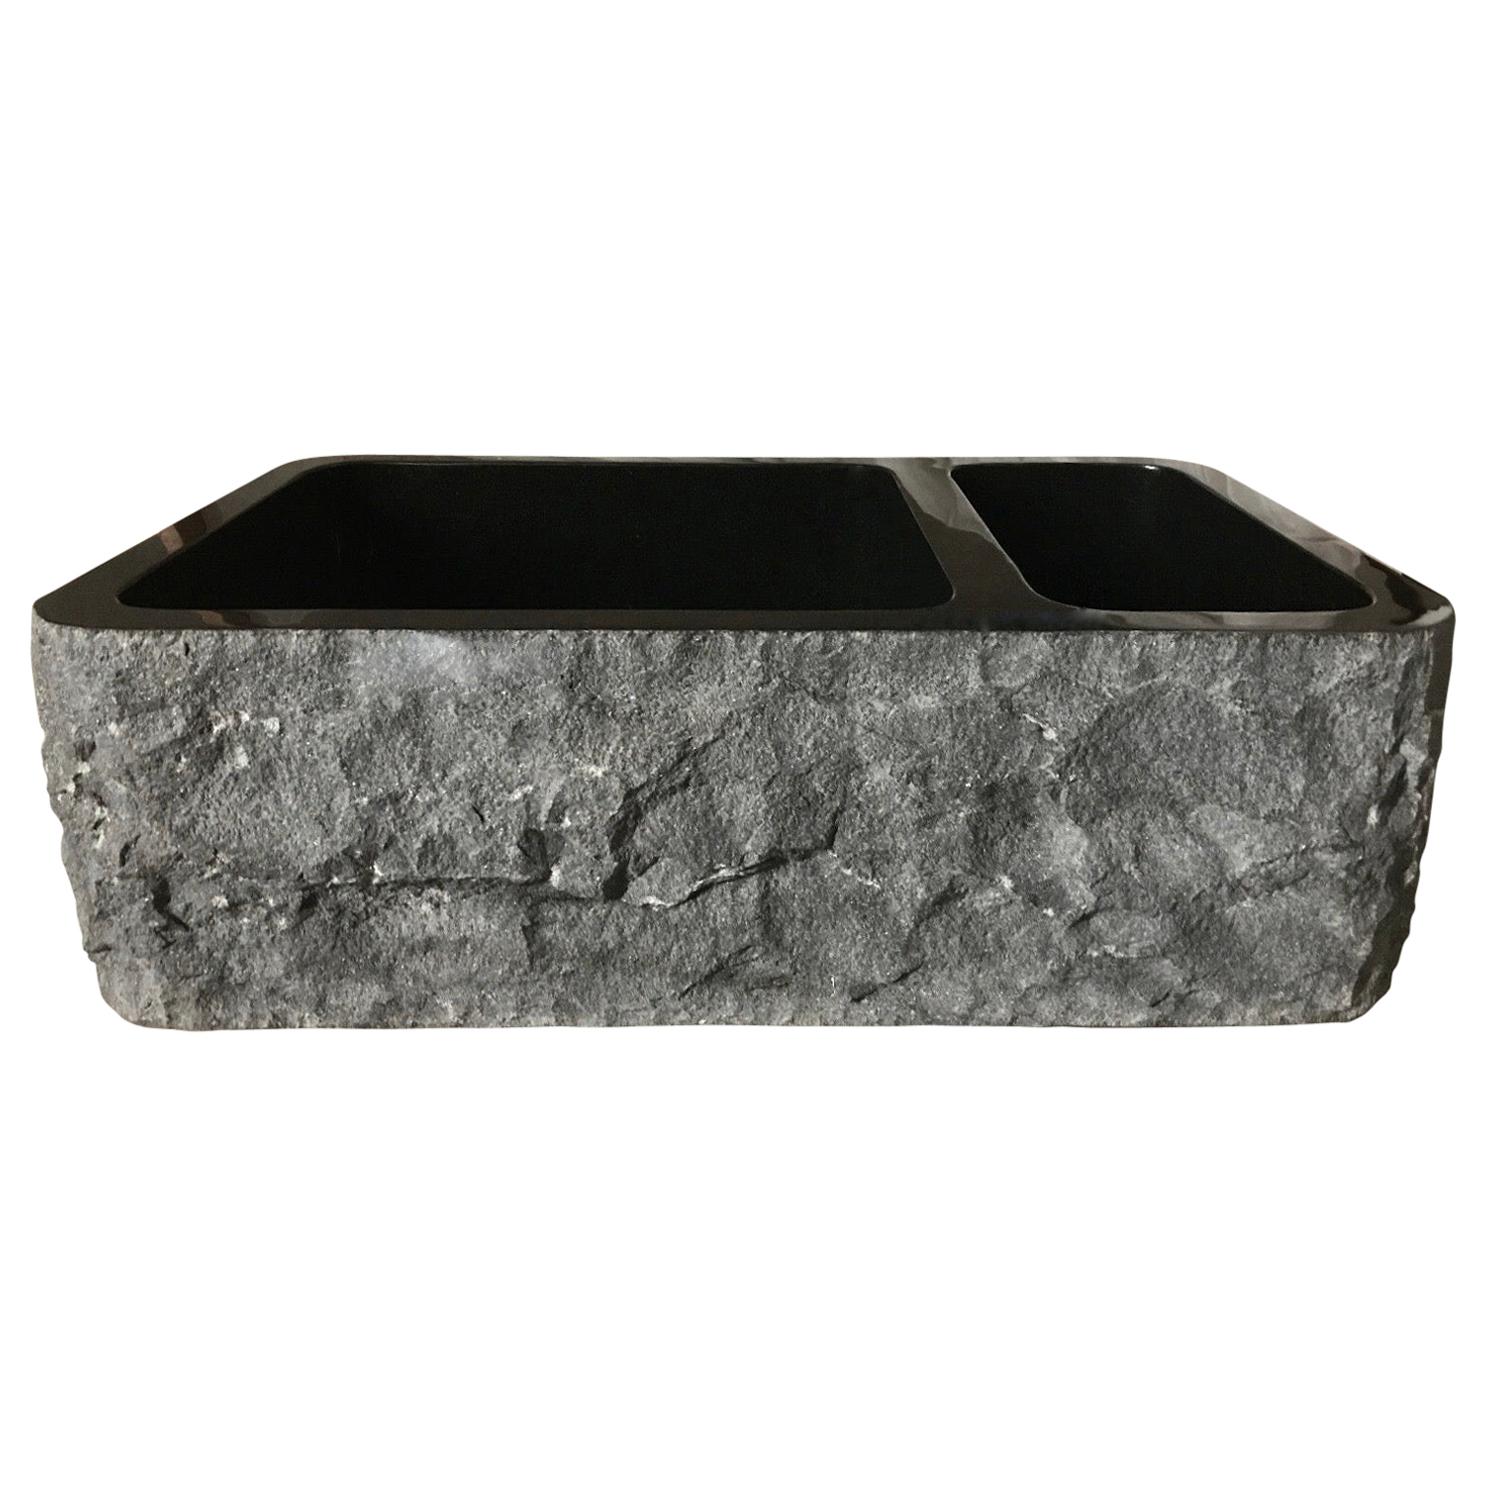 Black Granite Hand Carved Farmhouse Sink, Double Basin, Two-Sided, Polished, New